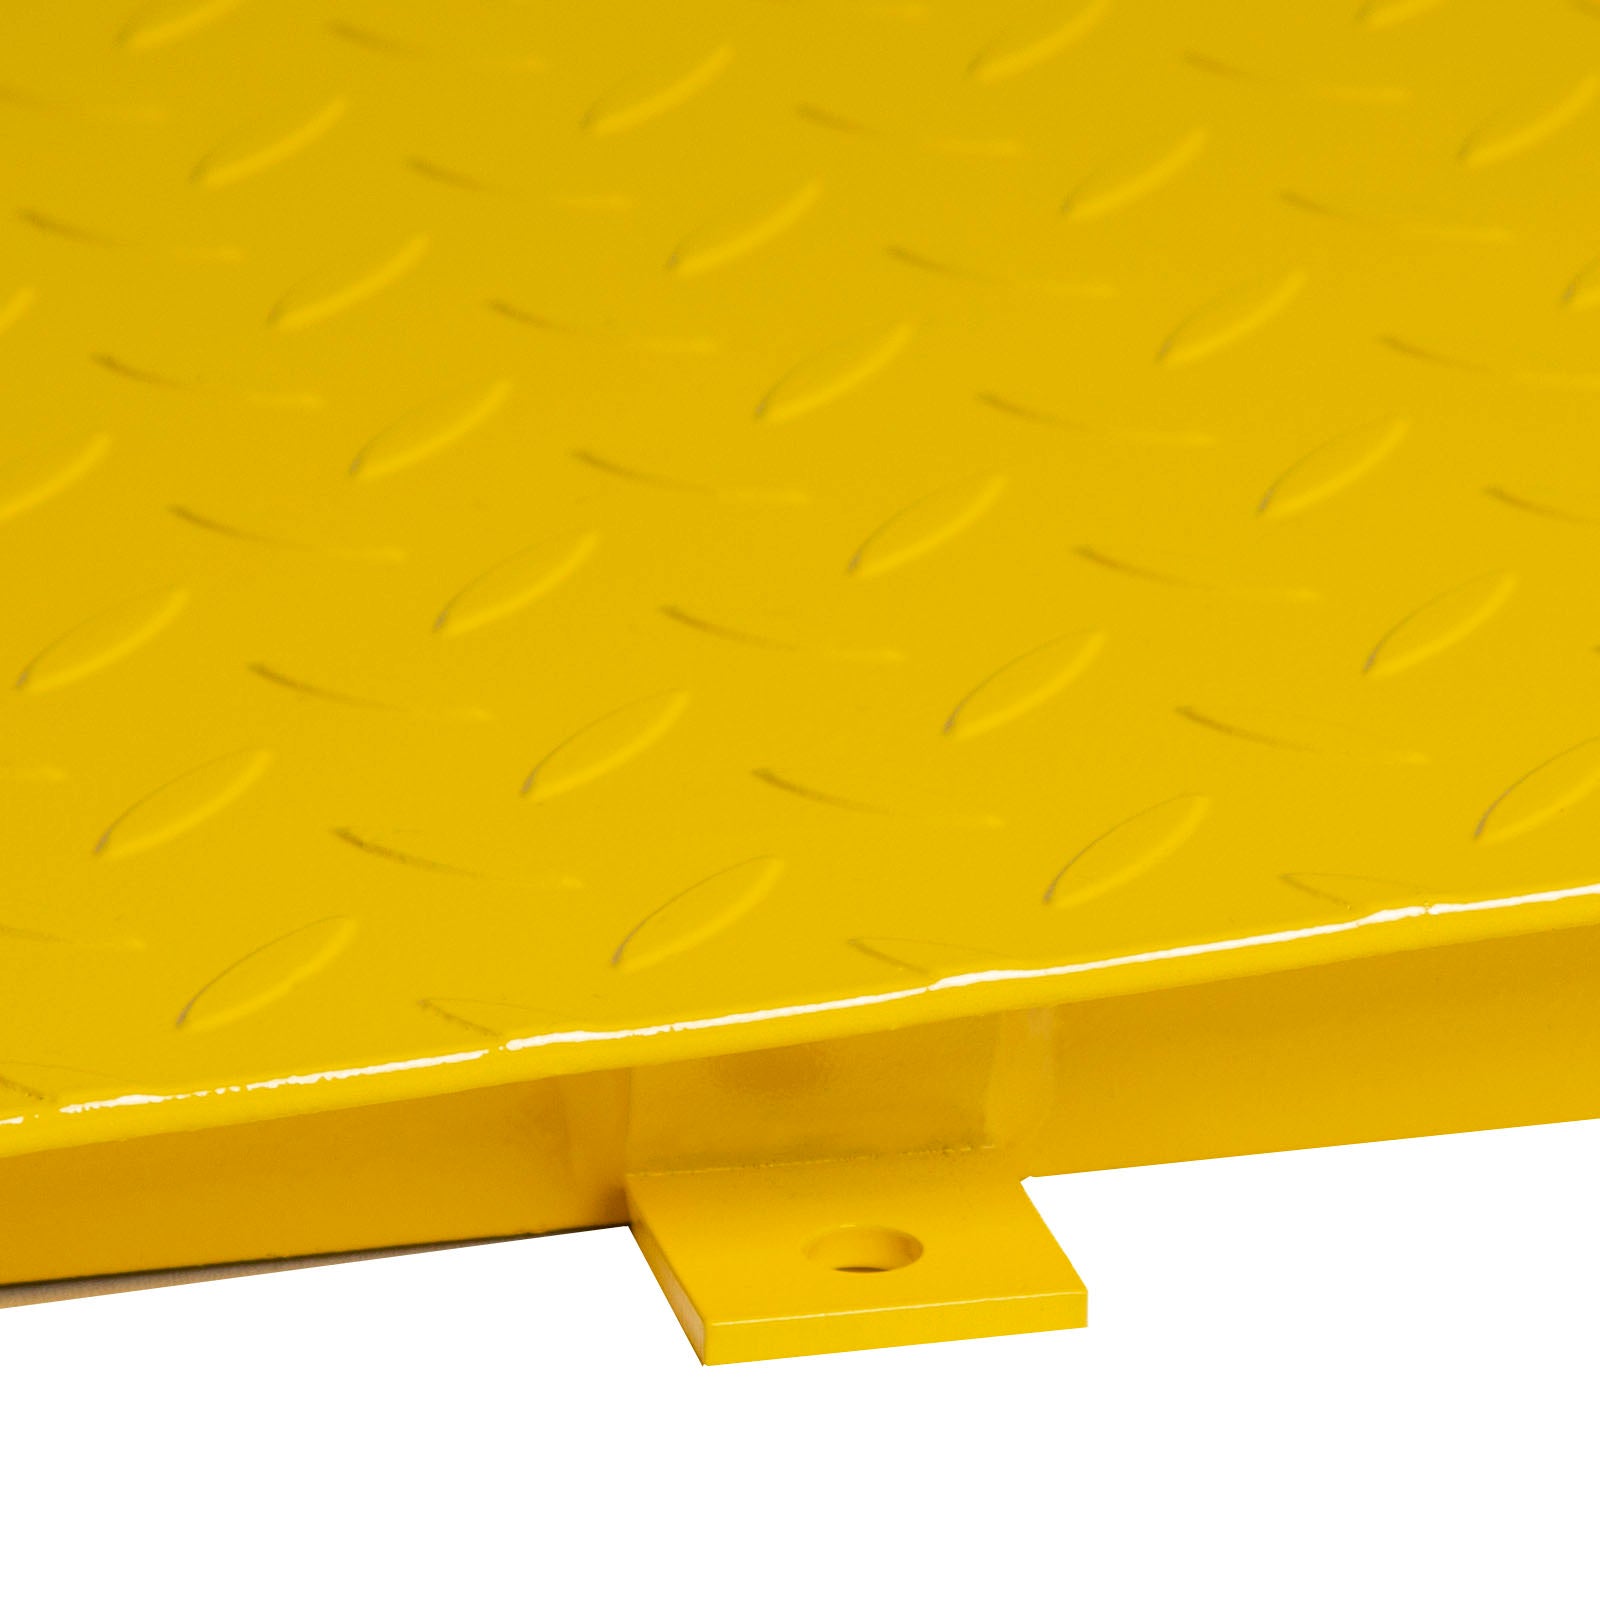 Close-up of one of a yellow metallic approach ramp's four lateral holds.